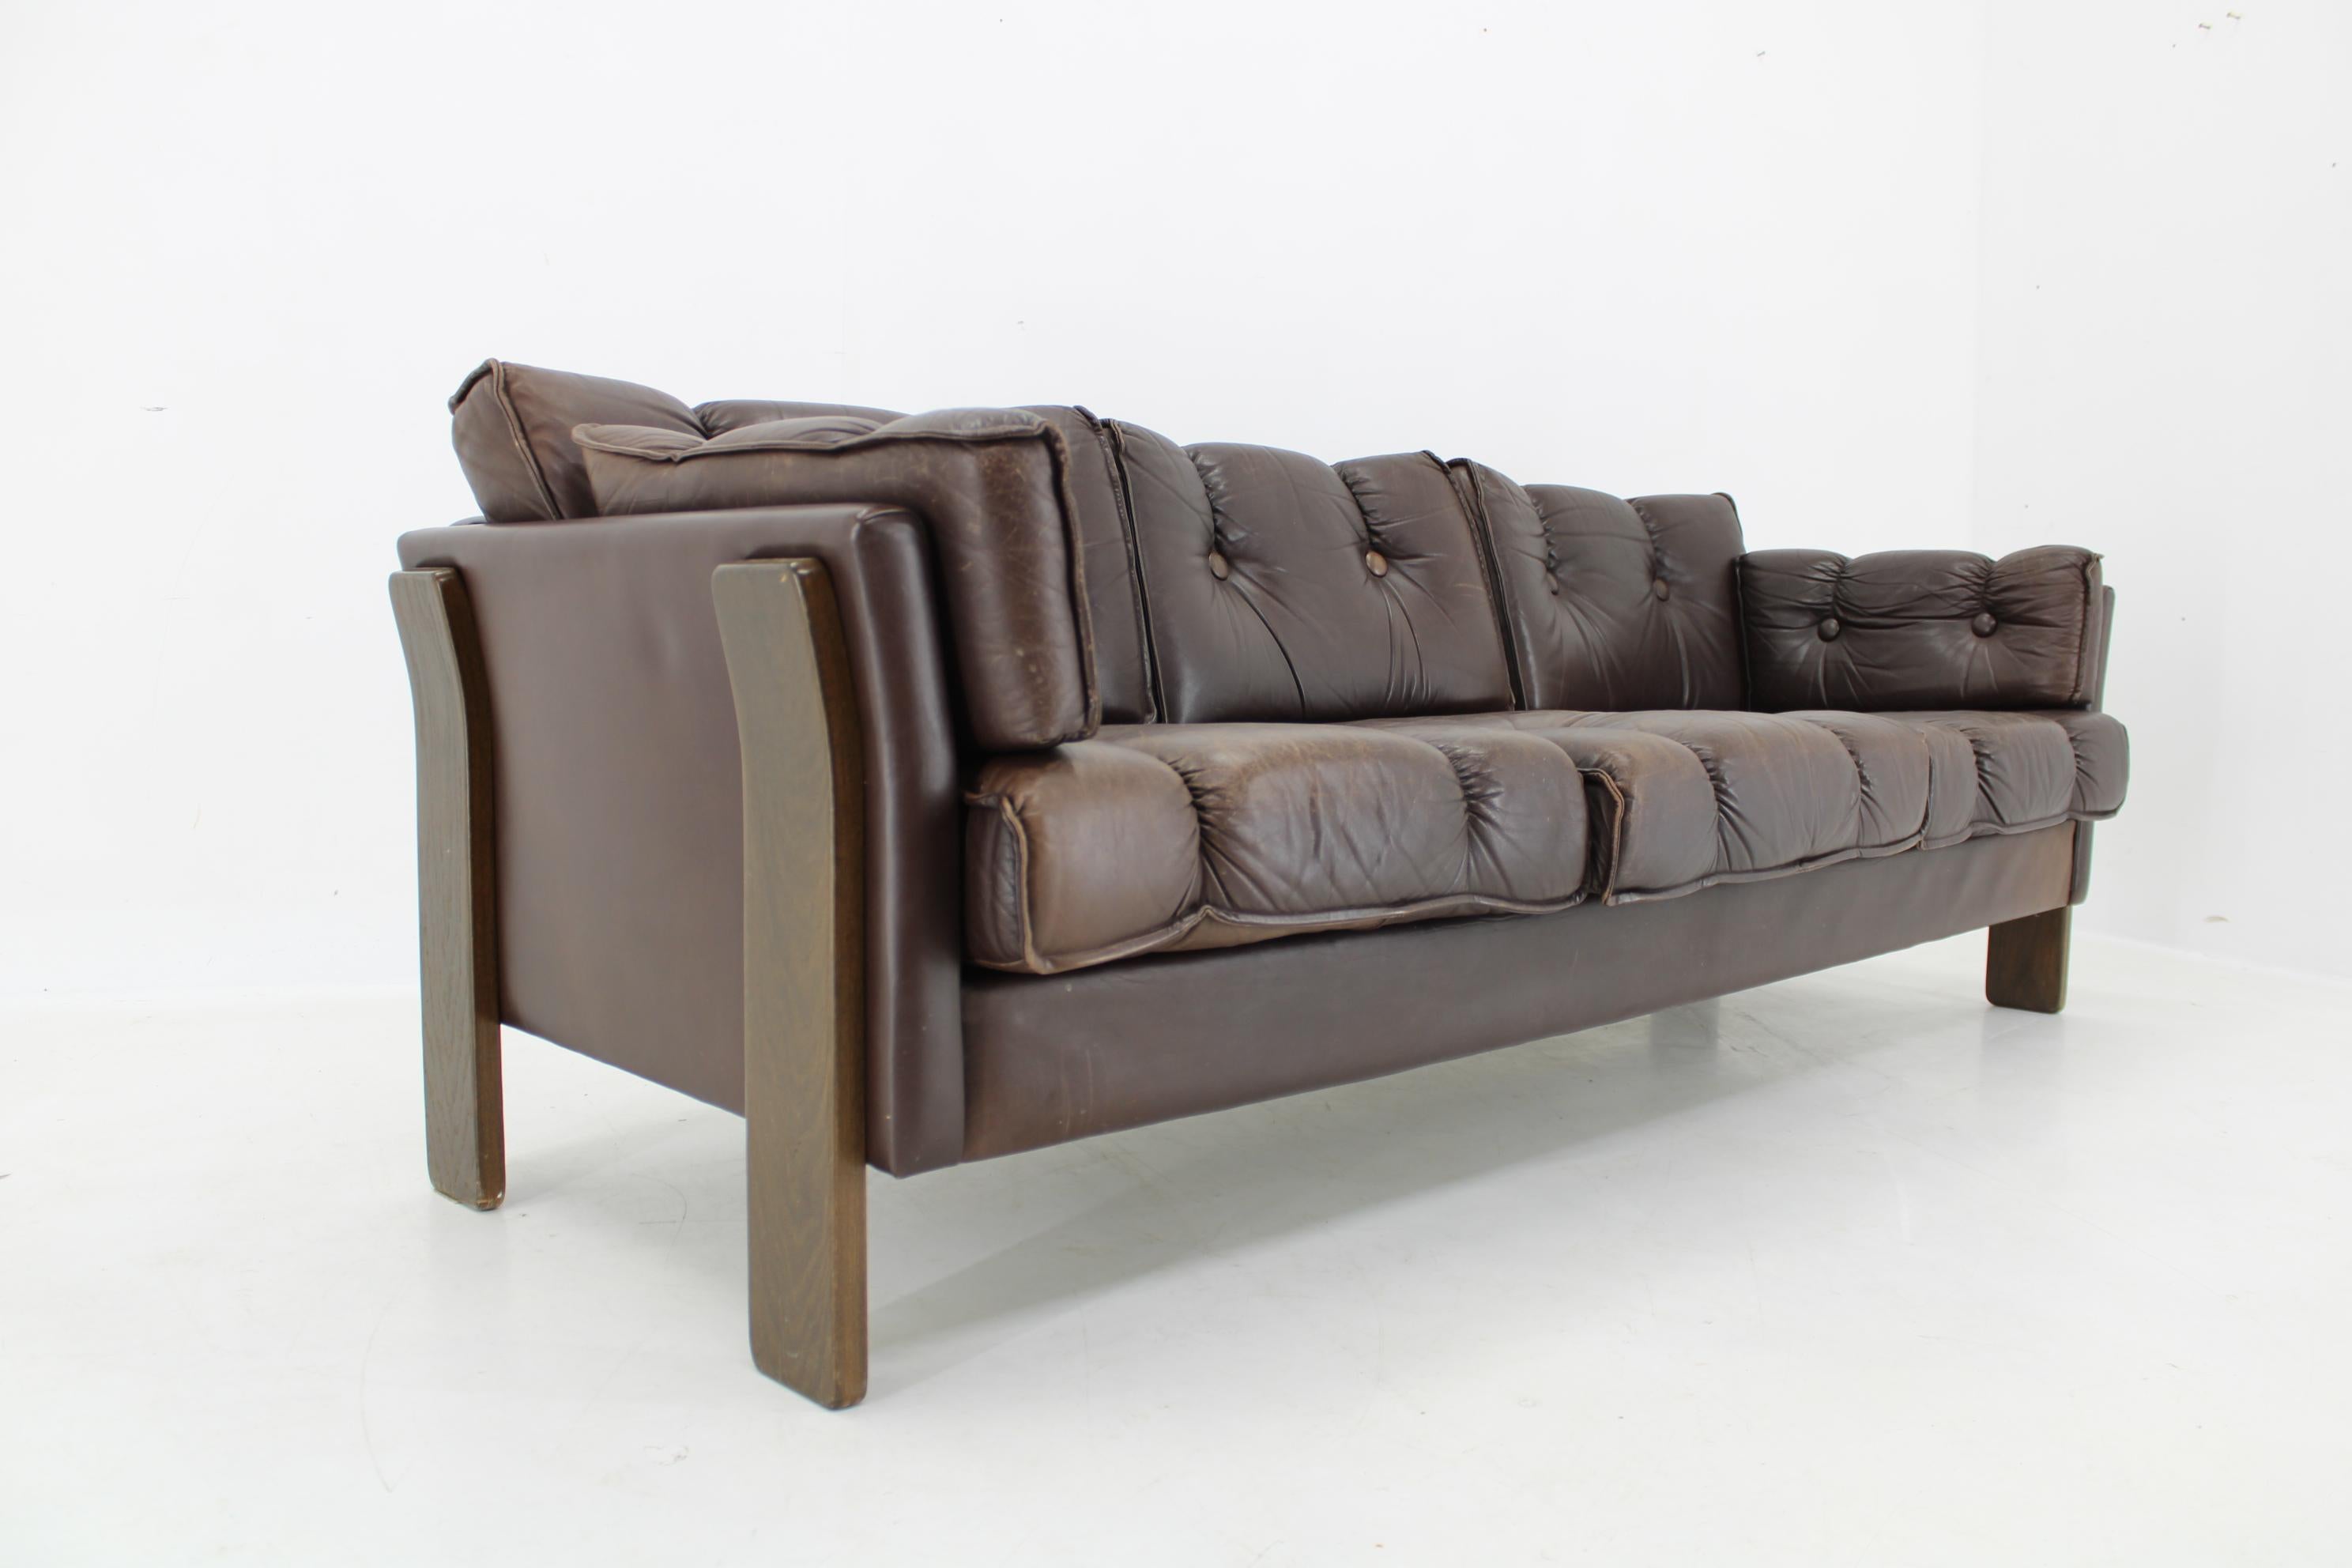 1970s Brown Leather 3-Seater Sofa, Denmark For Sale 1